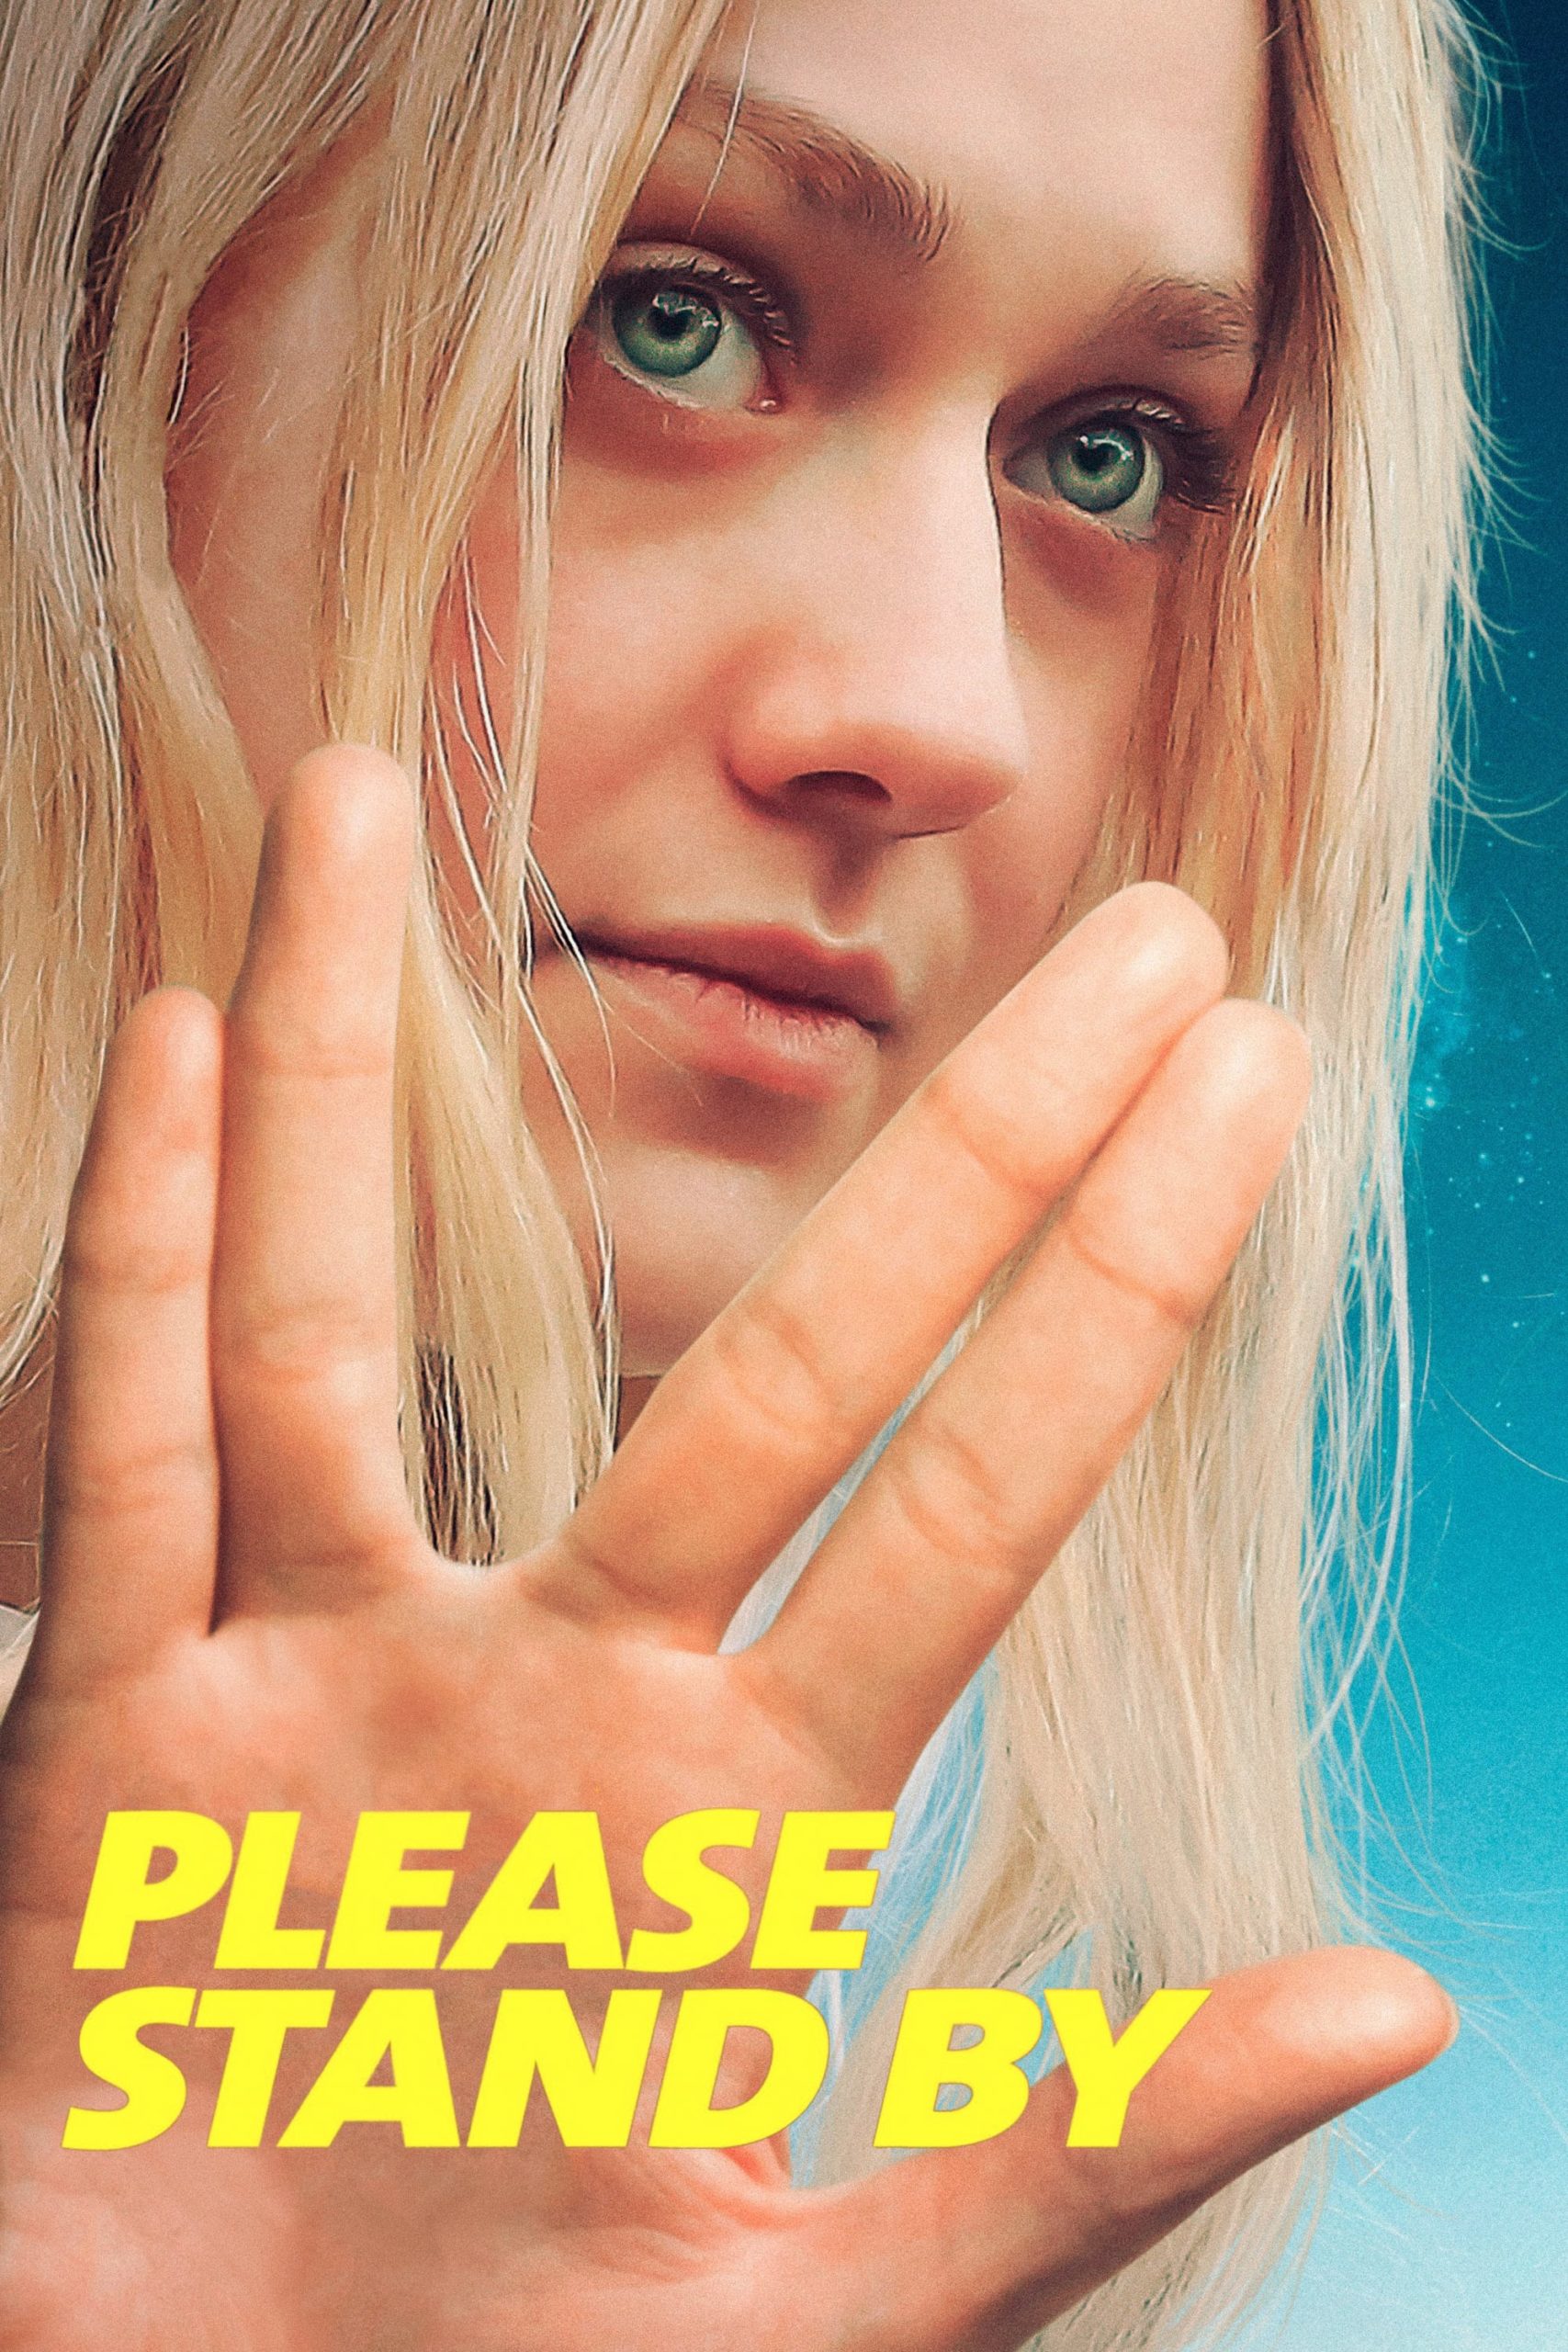 Poster for the movie "Please Stand By"